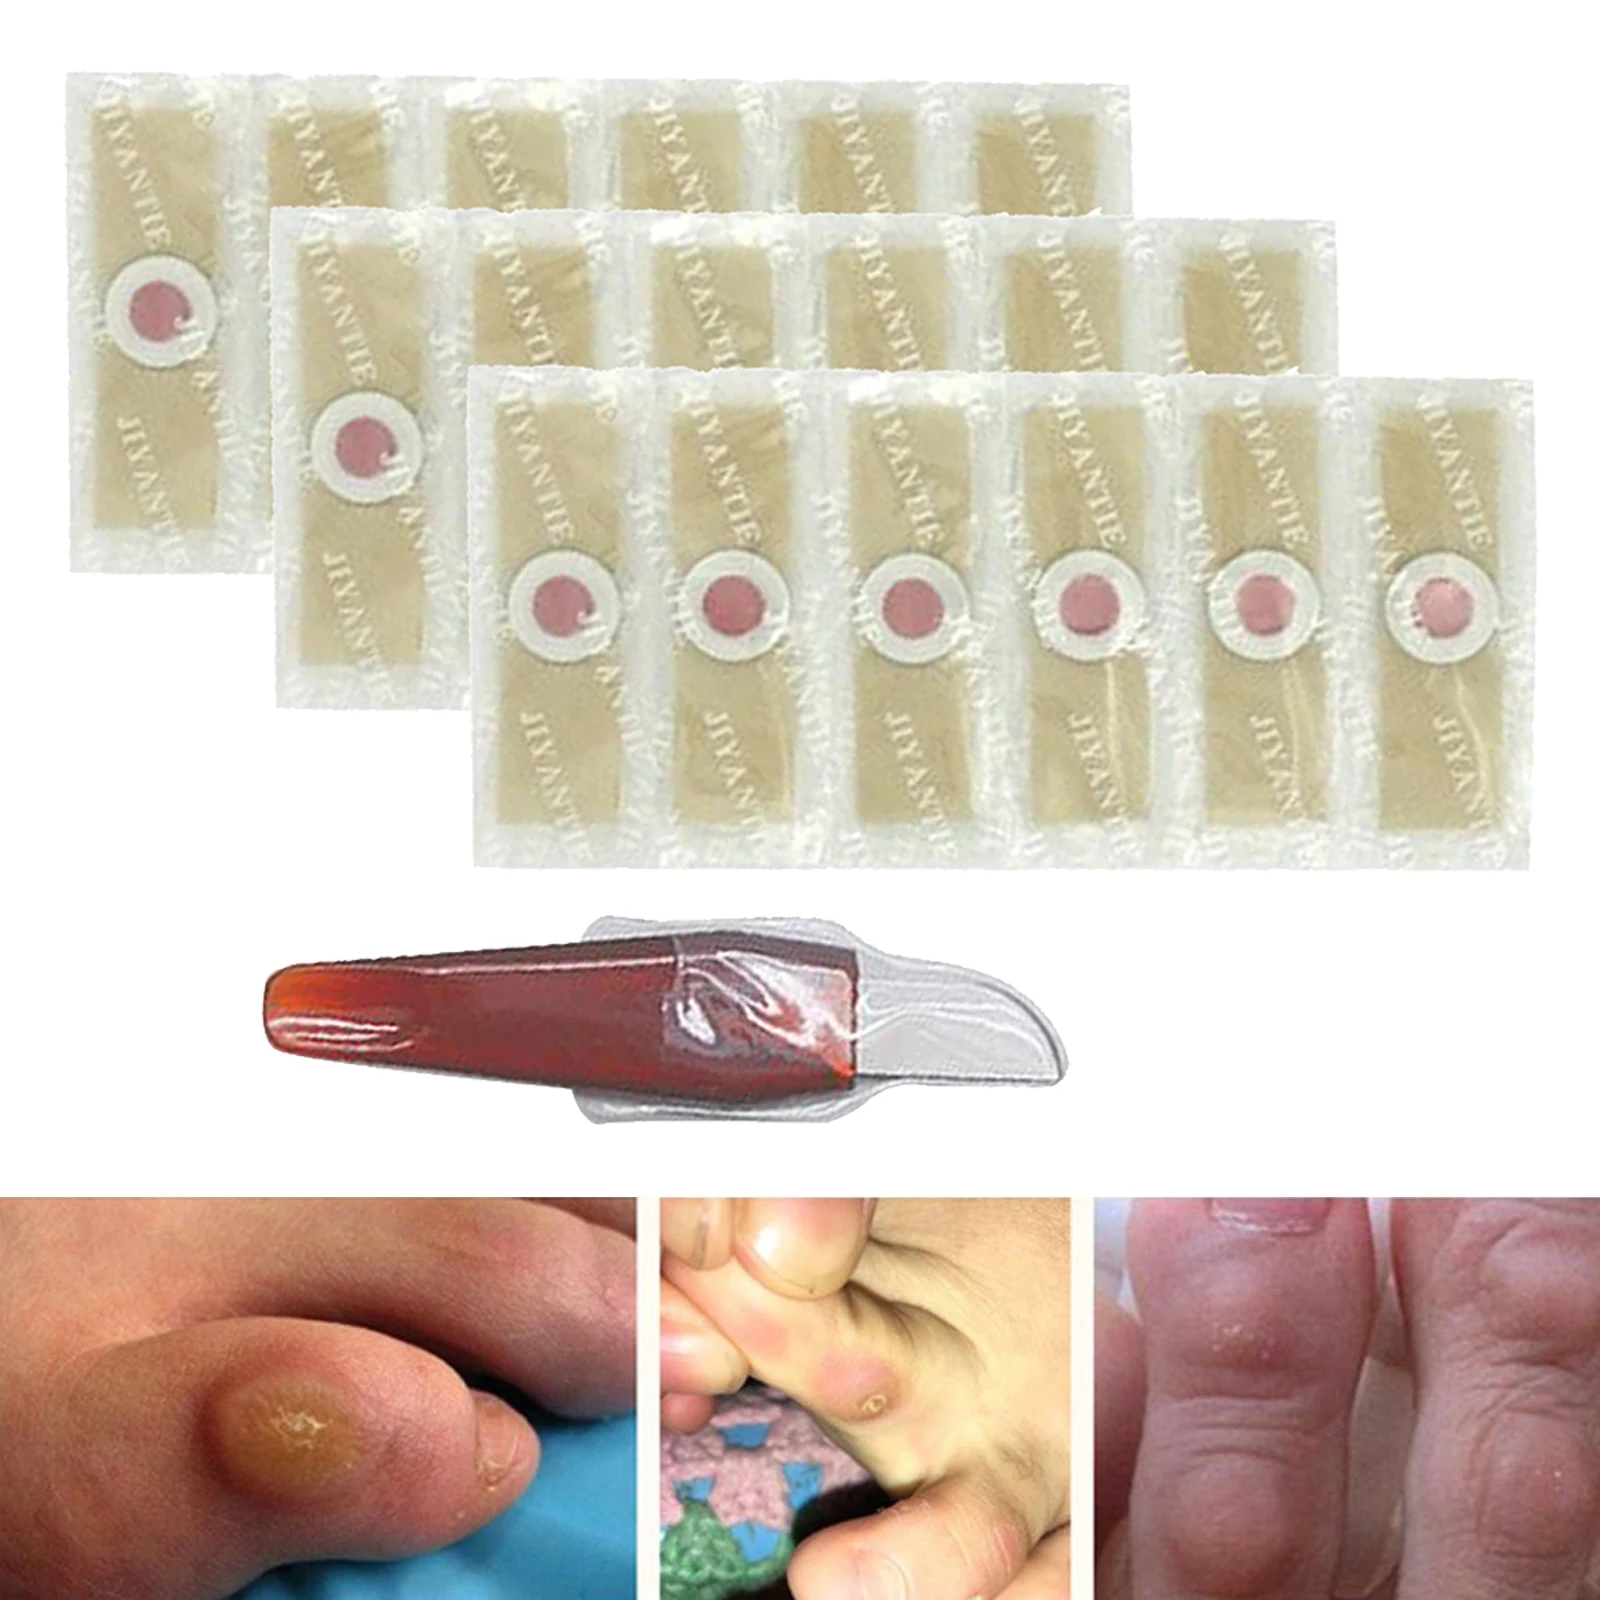 Pro Effective Foot Corn Removal Corn Remover Cushions Toe Protector with 